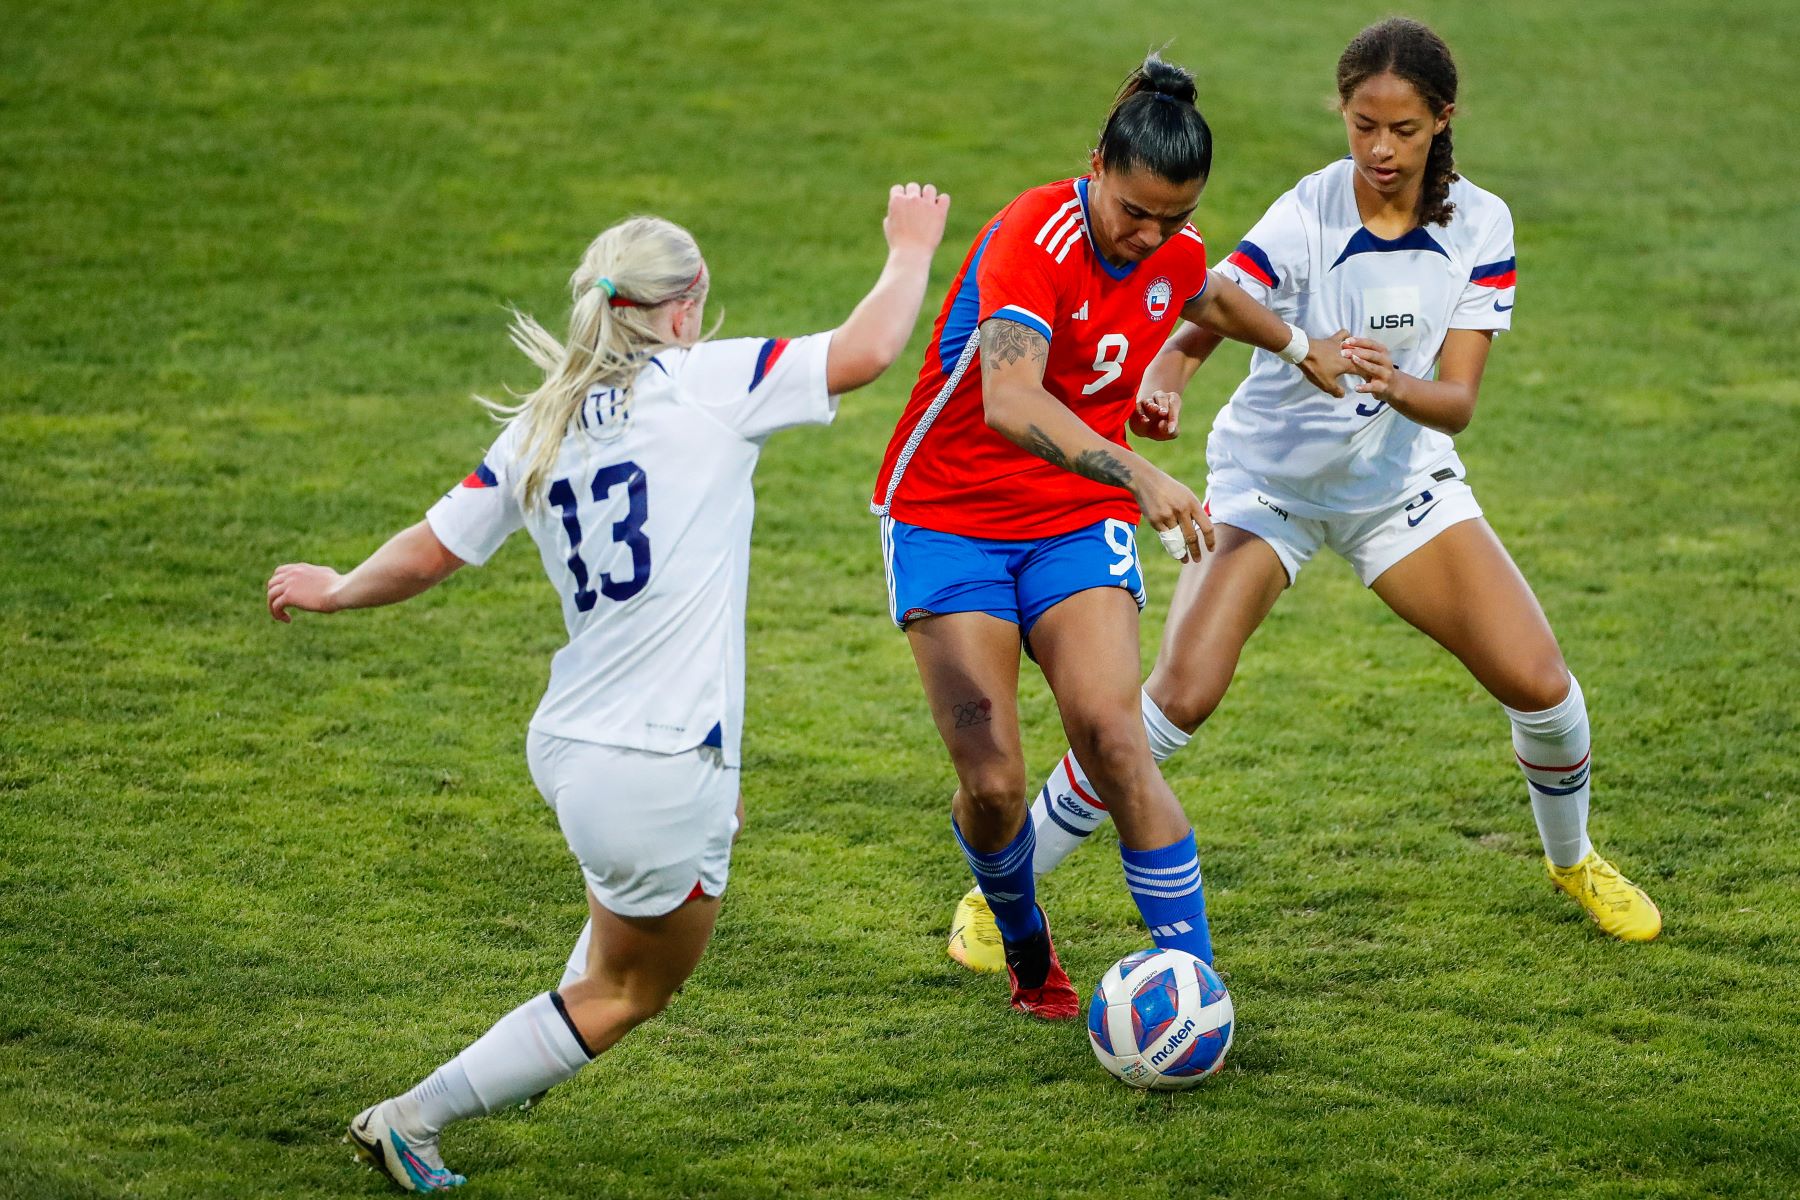 Soccer at Pan American Games 2023 preview: Full schedule and how to watch  live